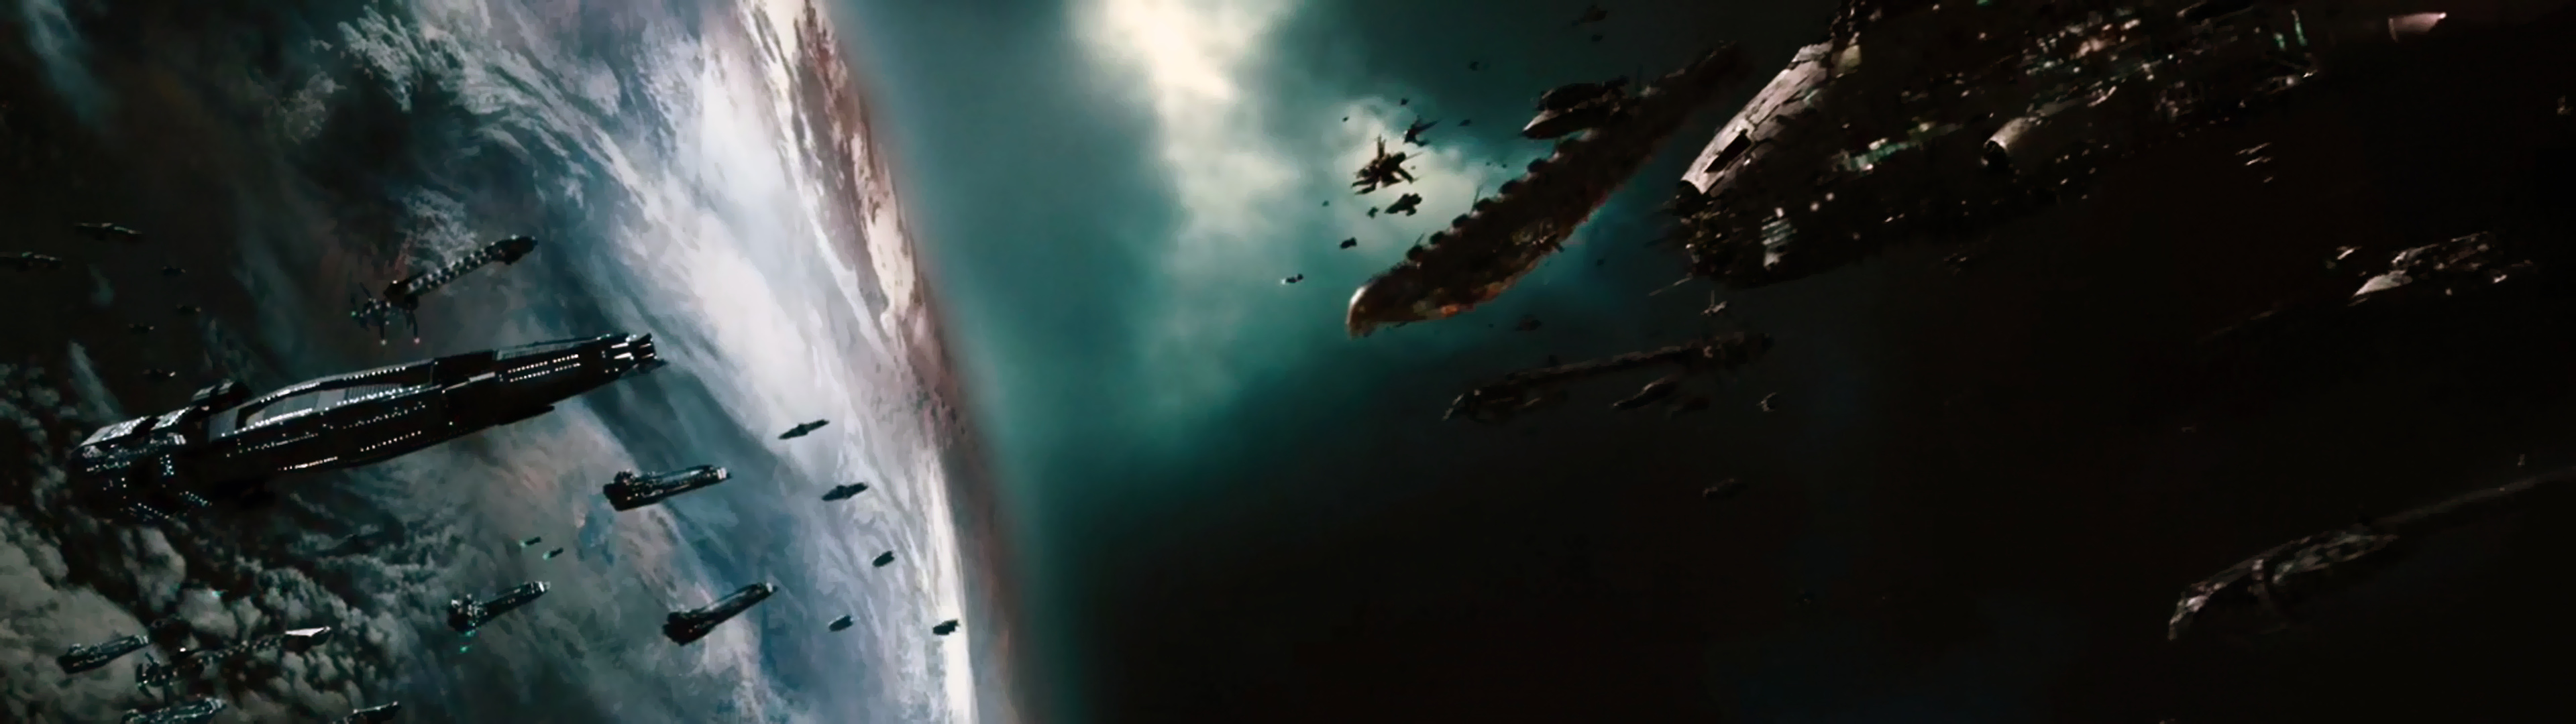 EVE Online, Serenity wallpaper, Outer space, Free download, 3840x1080 Dual Screen Desktop